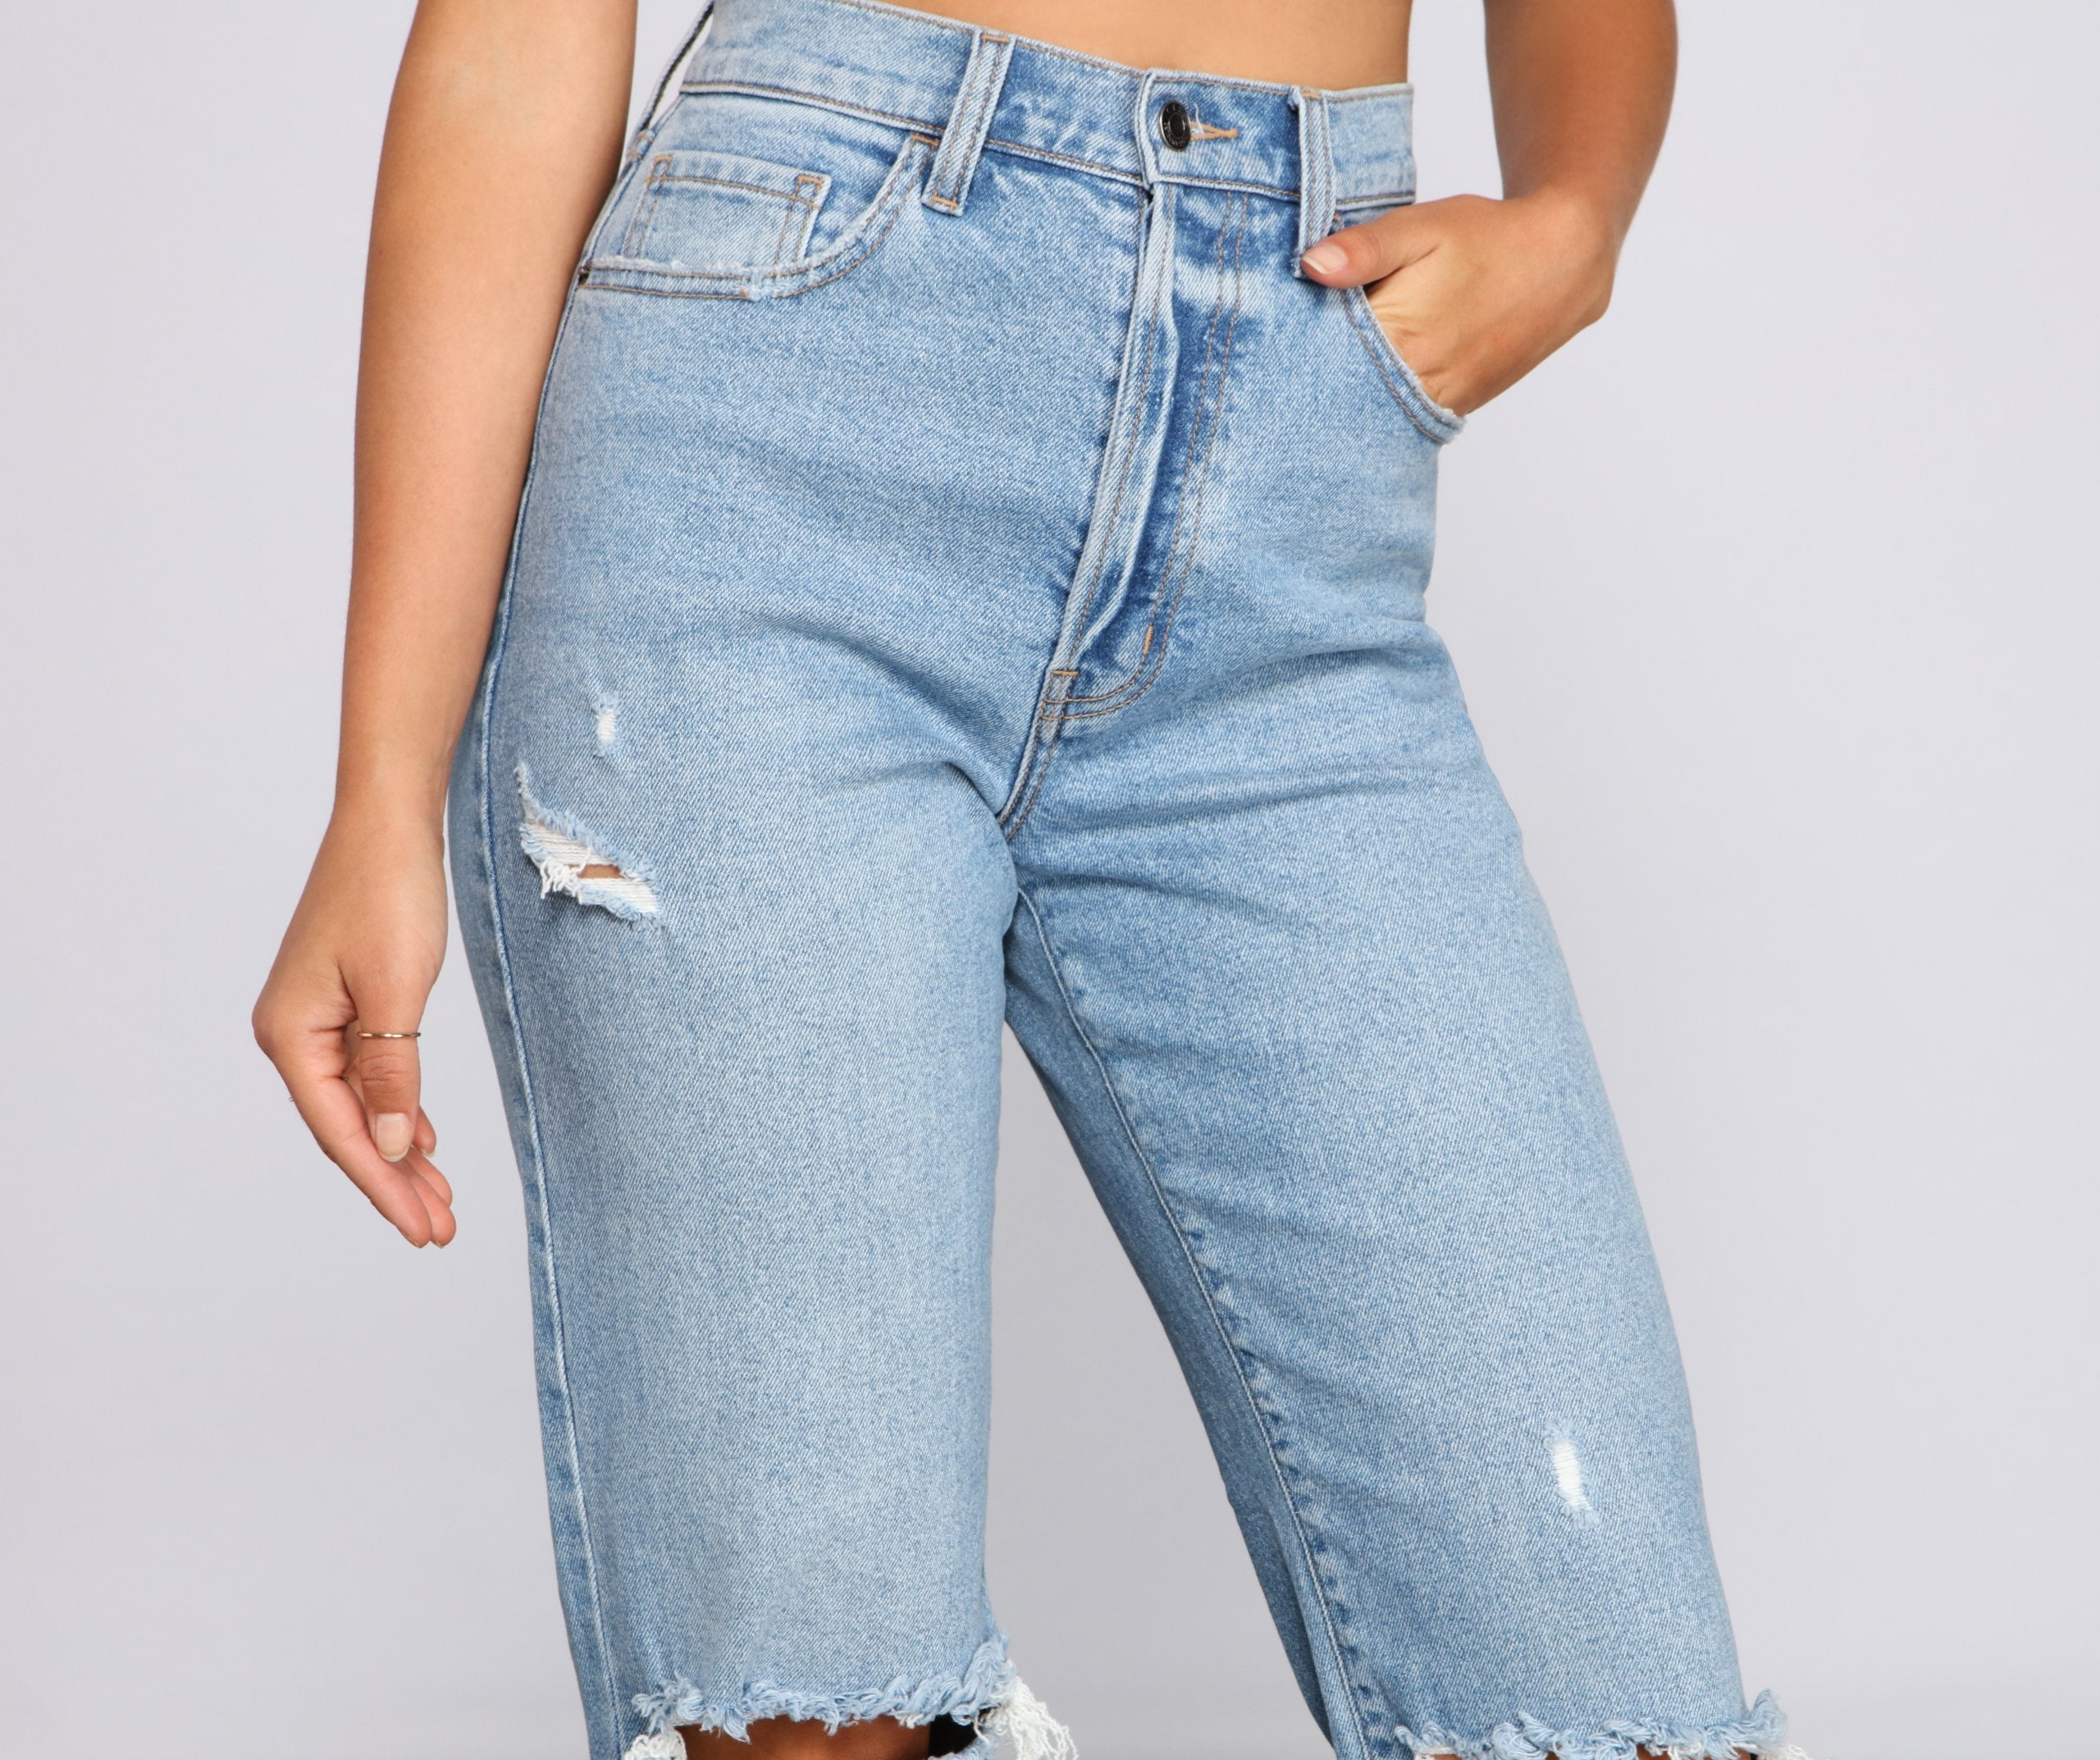 High Rise Distressed Boyfriend Jeans - Lady Occasions